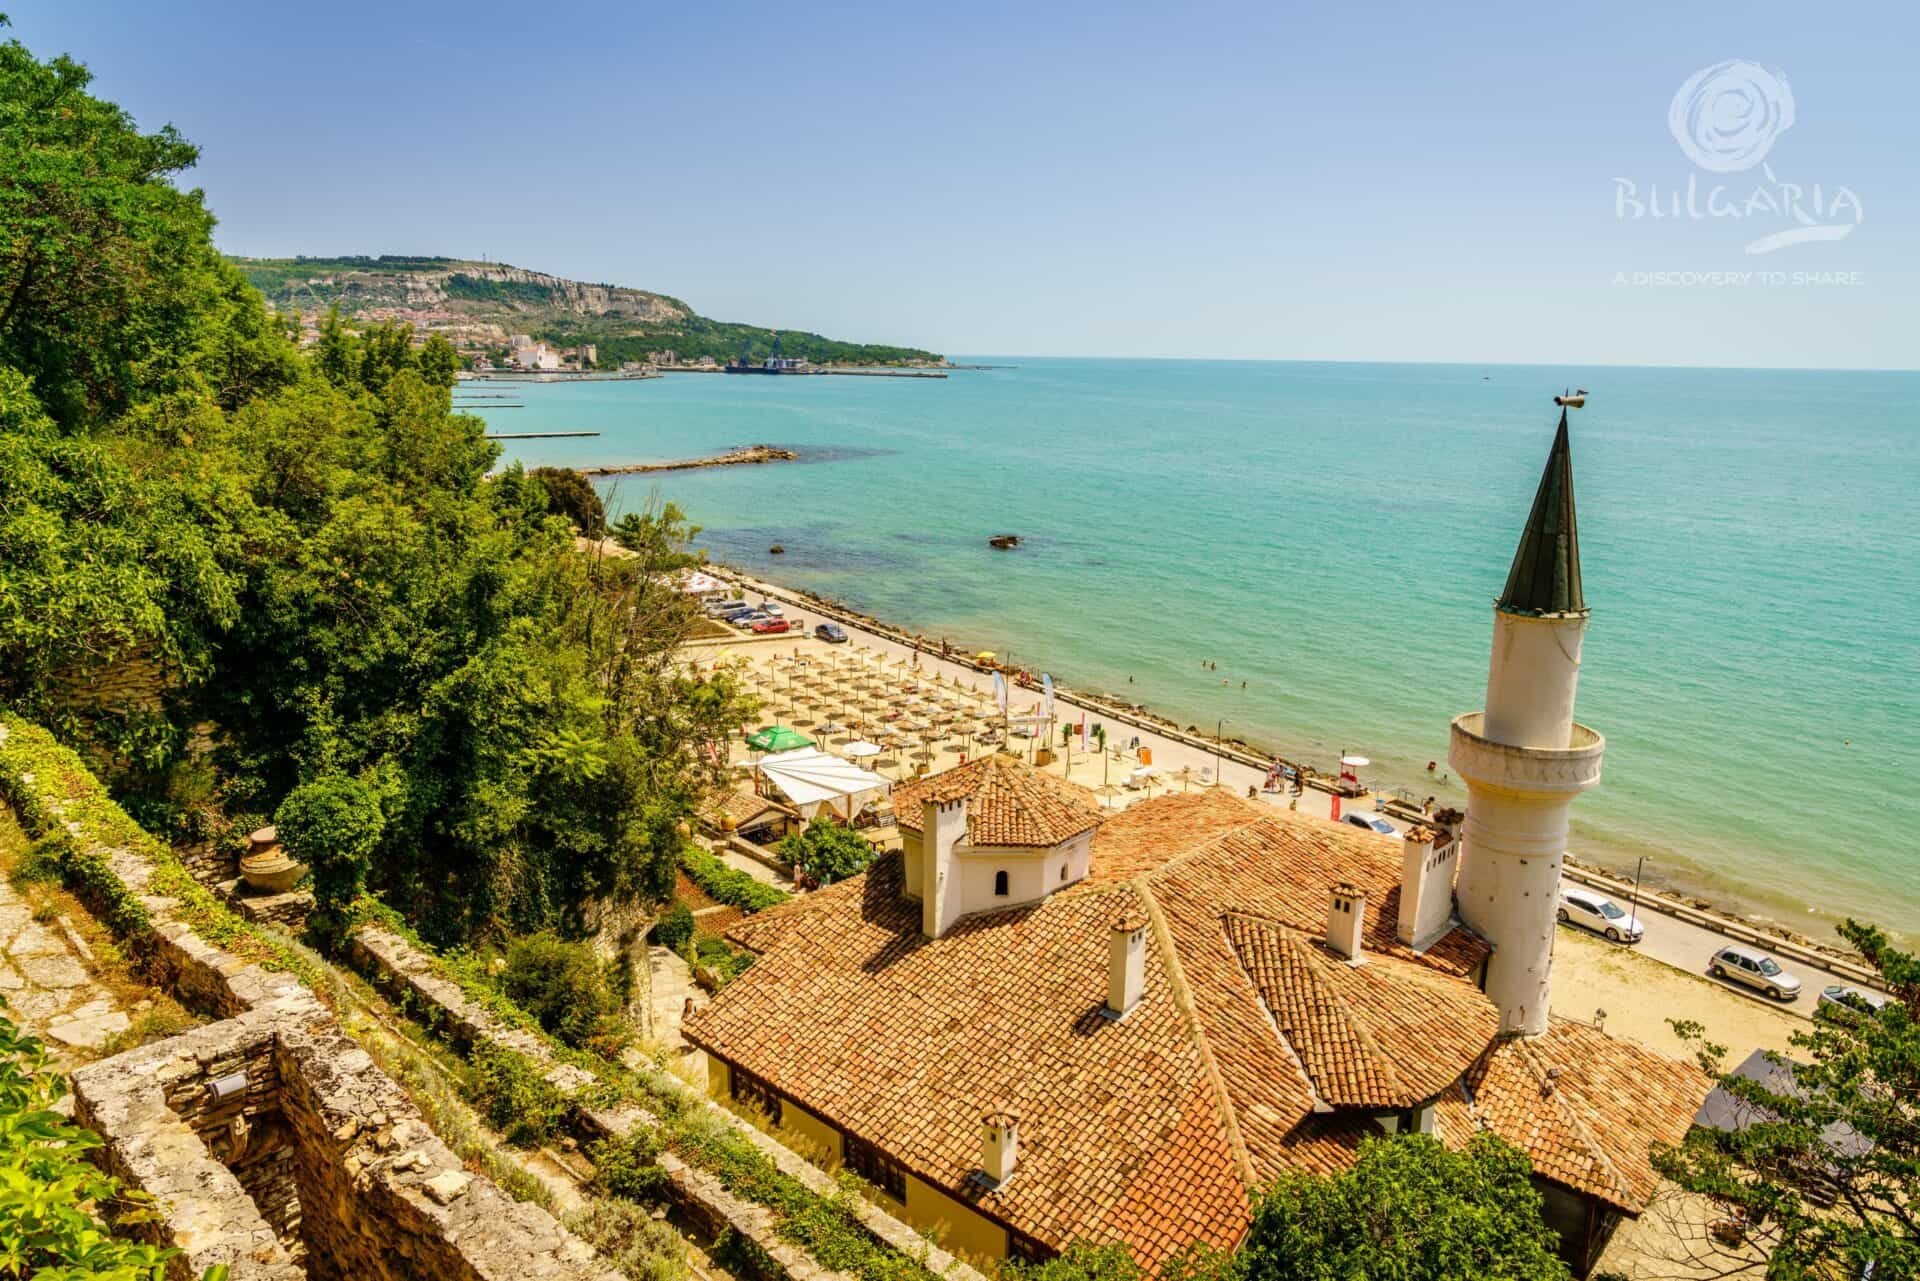 A serene beach with a picturesque church perched on a hillside, creating a beautiful coastal landscape.